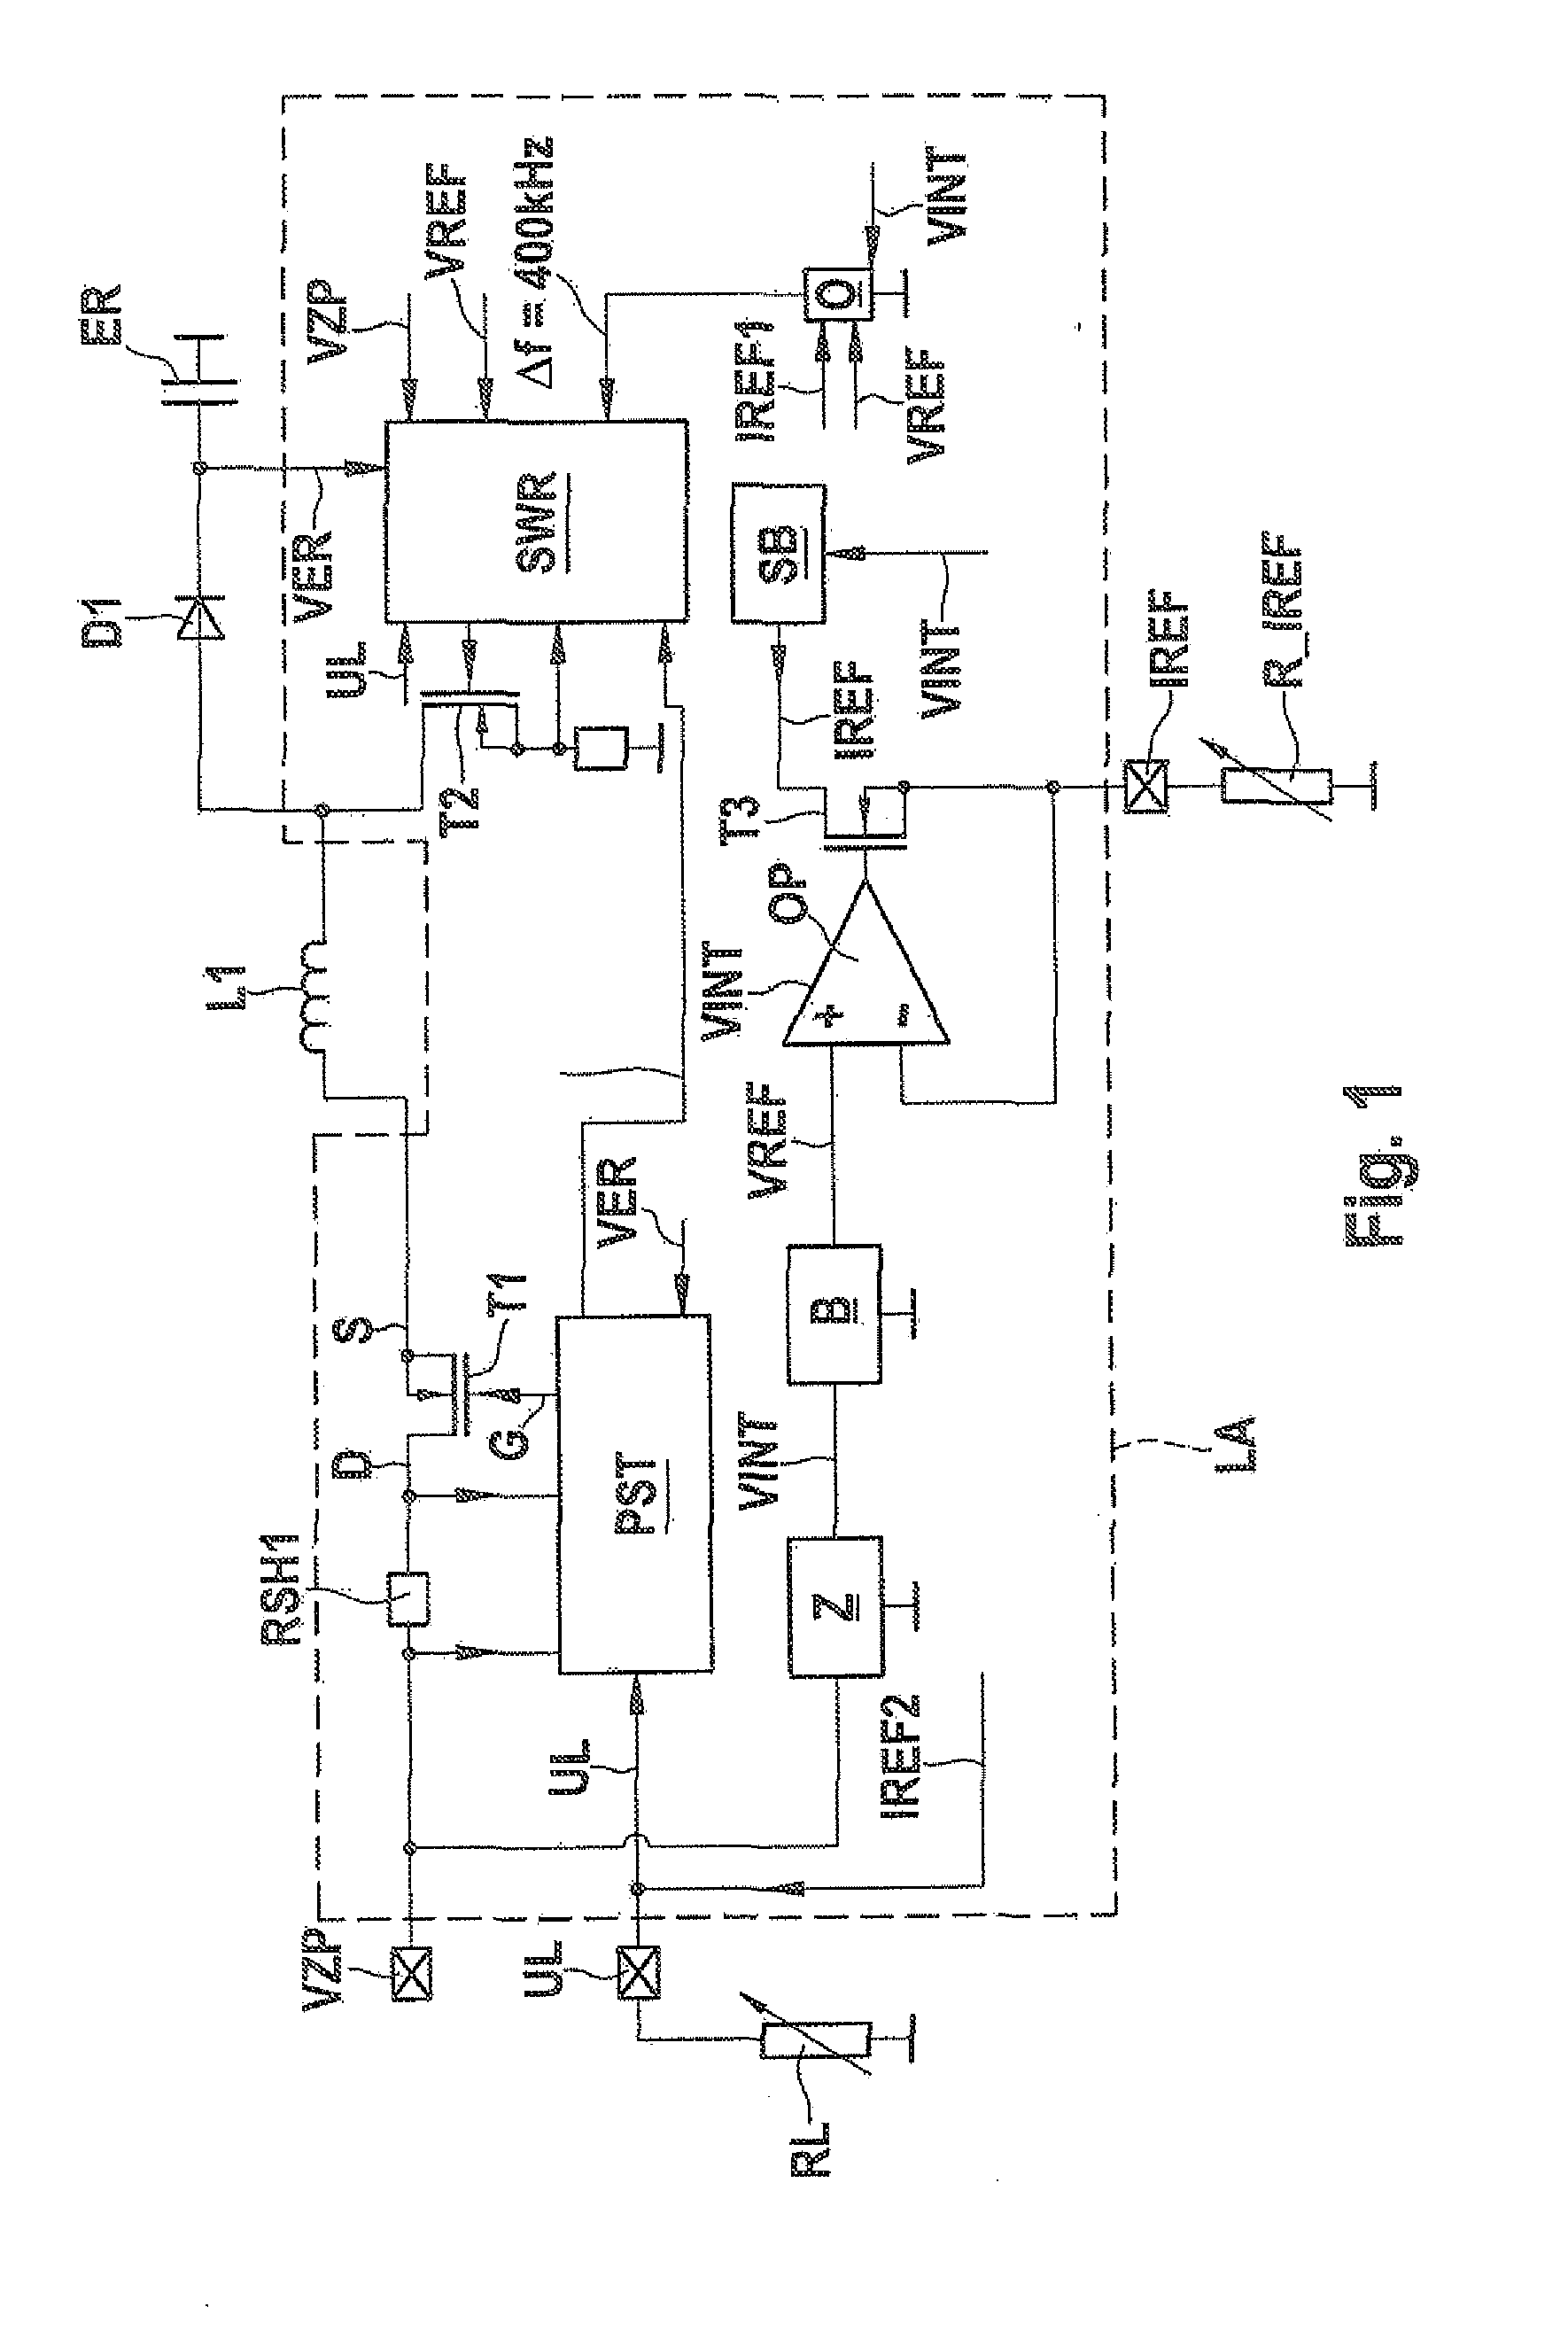 Control unit and method for activating personal protection devices